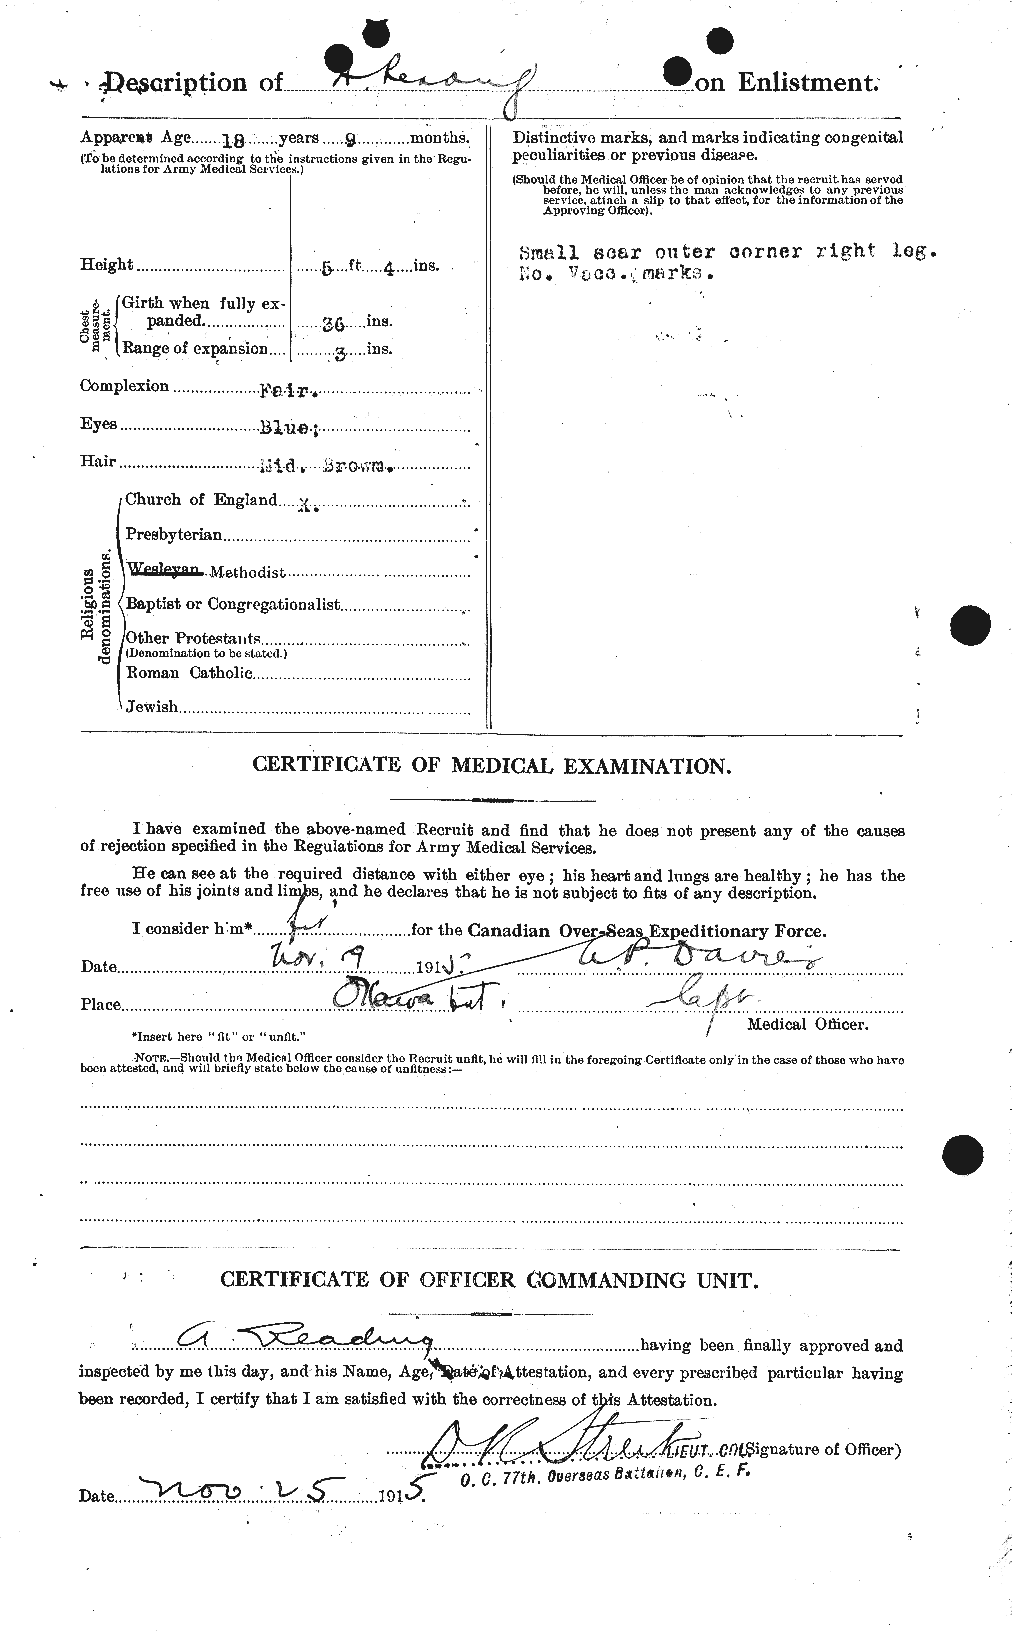 Personnel Records of the First World War - CEF 598402b